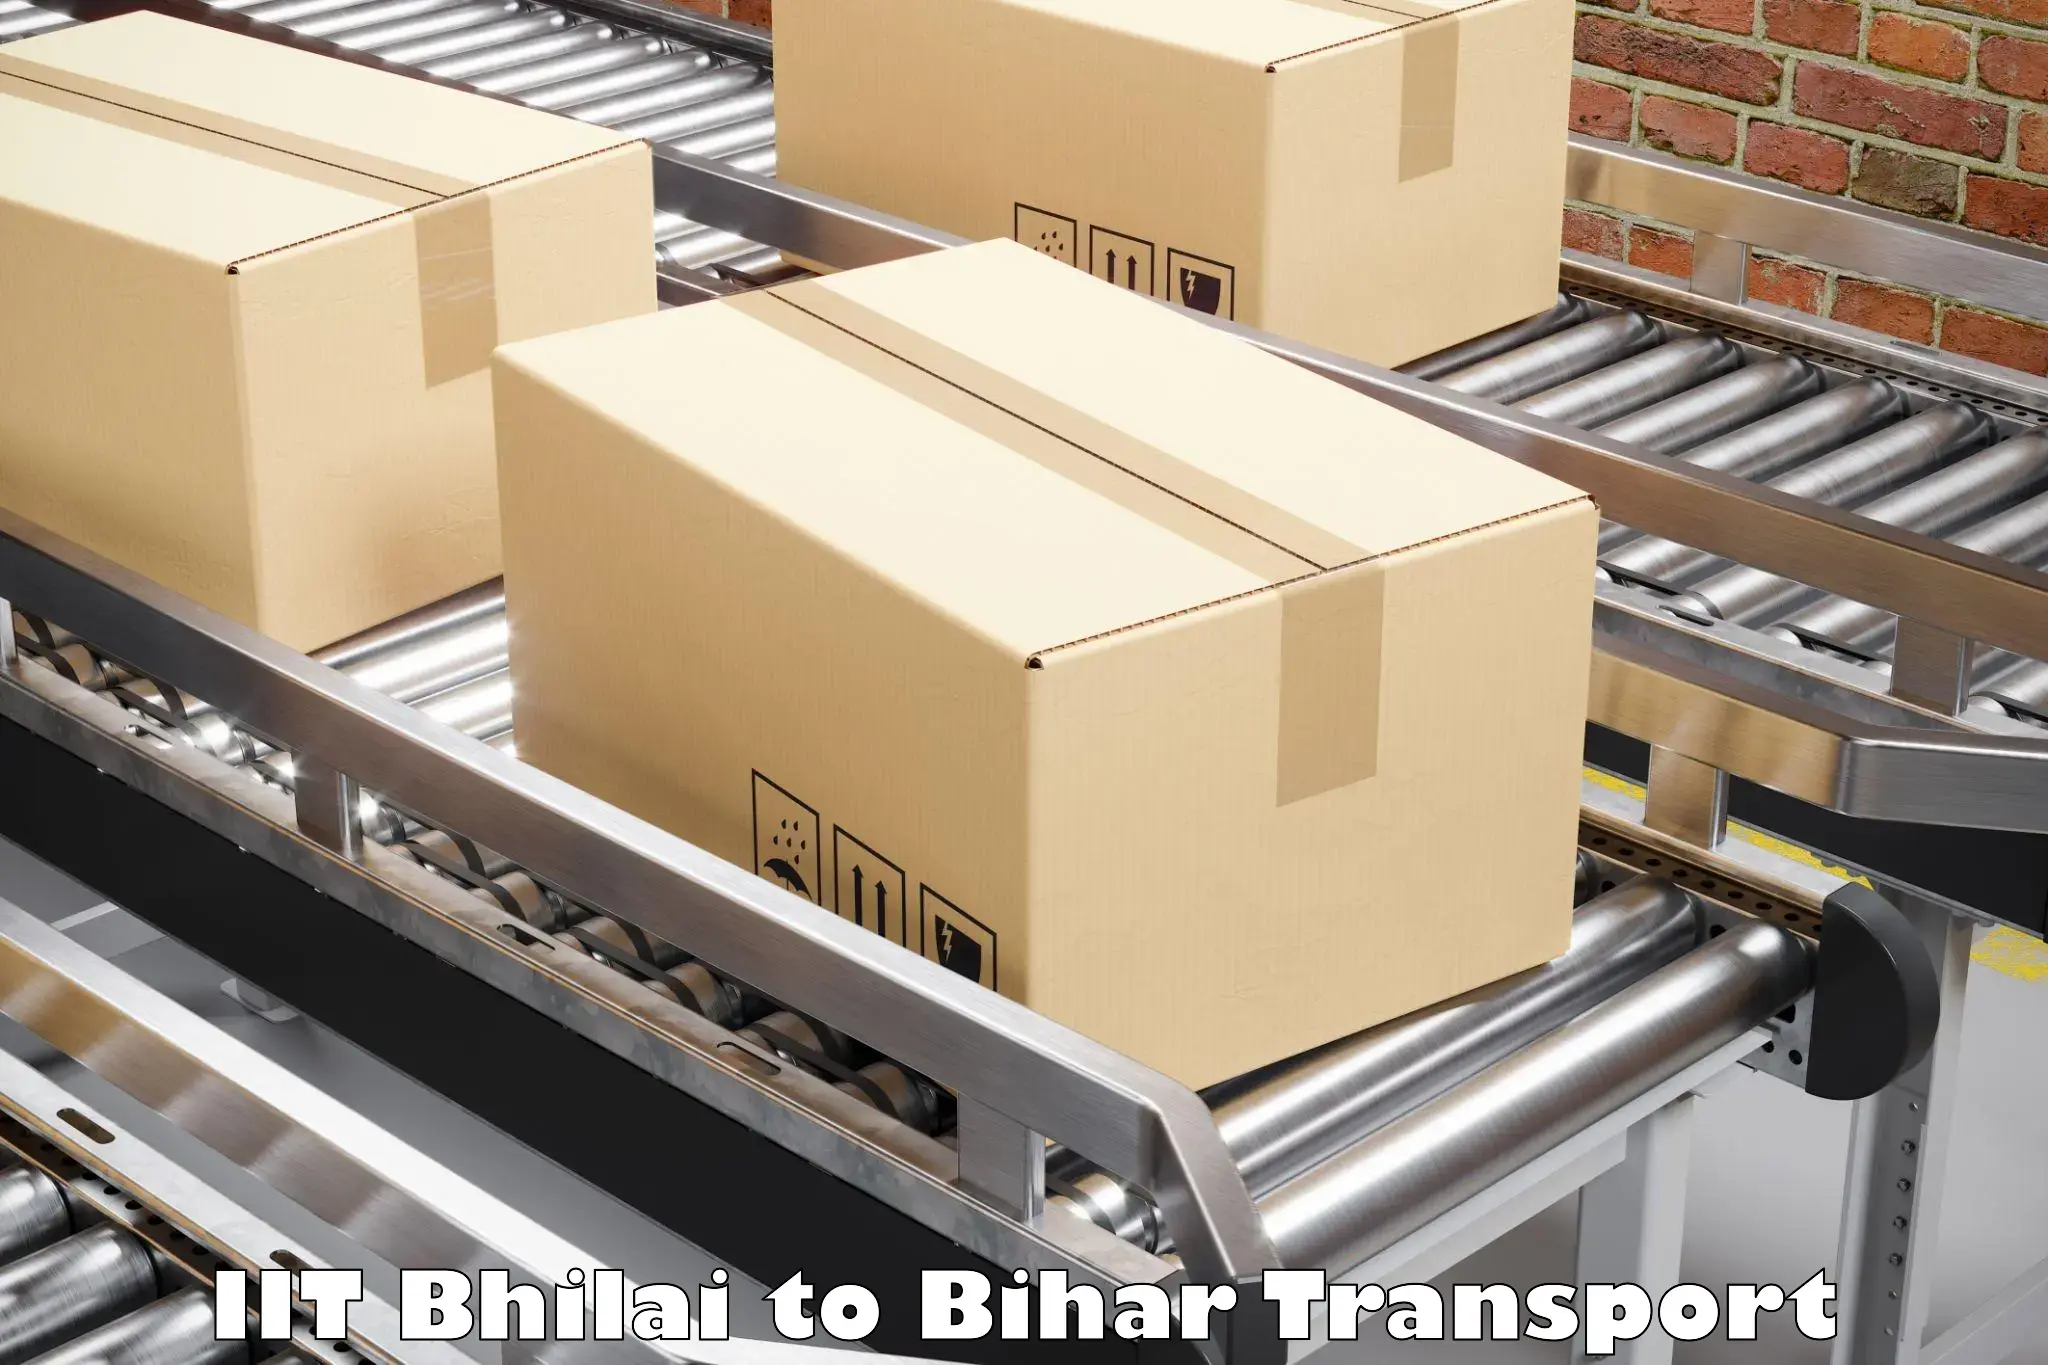 Daily parcel service transport IIT Bhilai to Banka